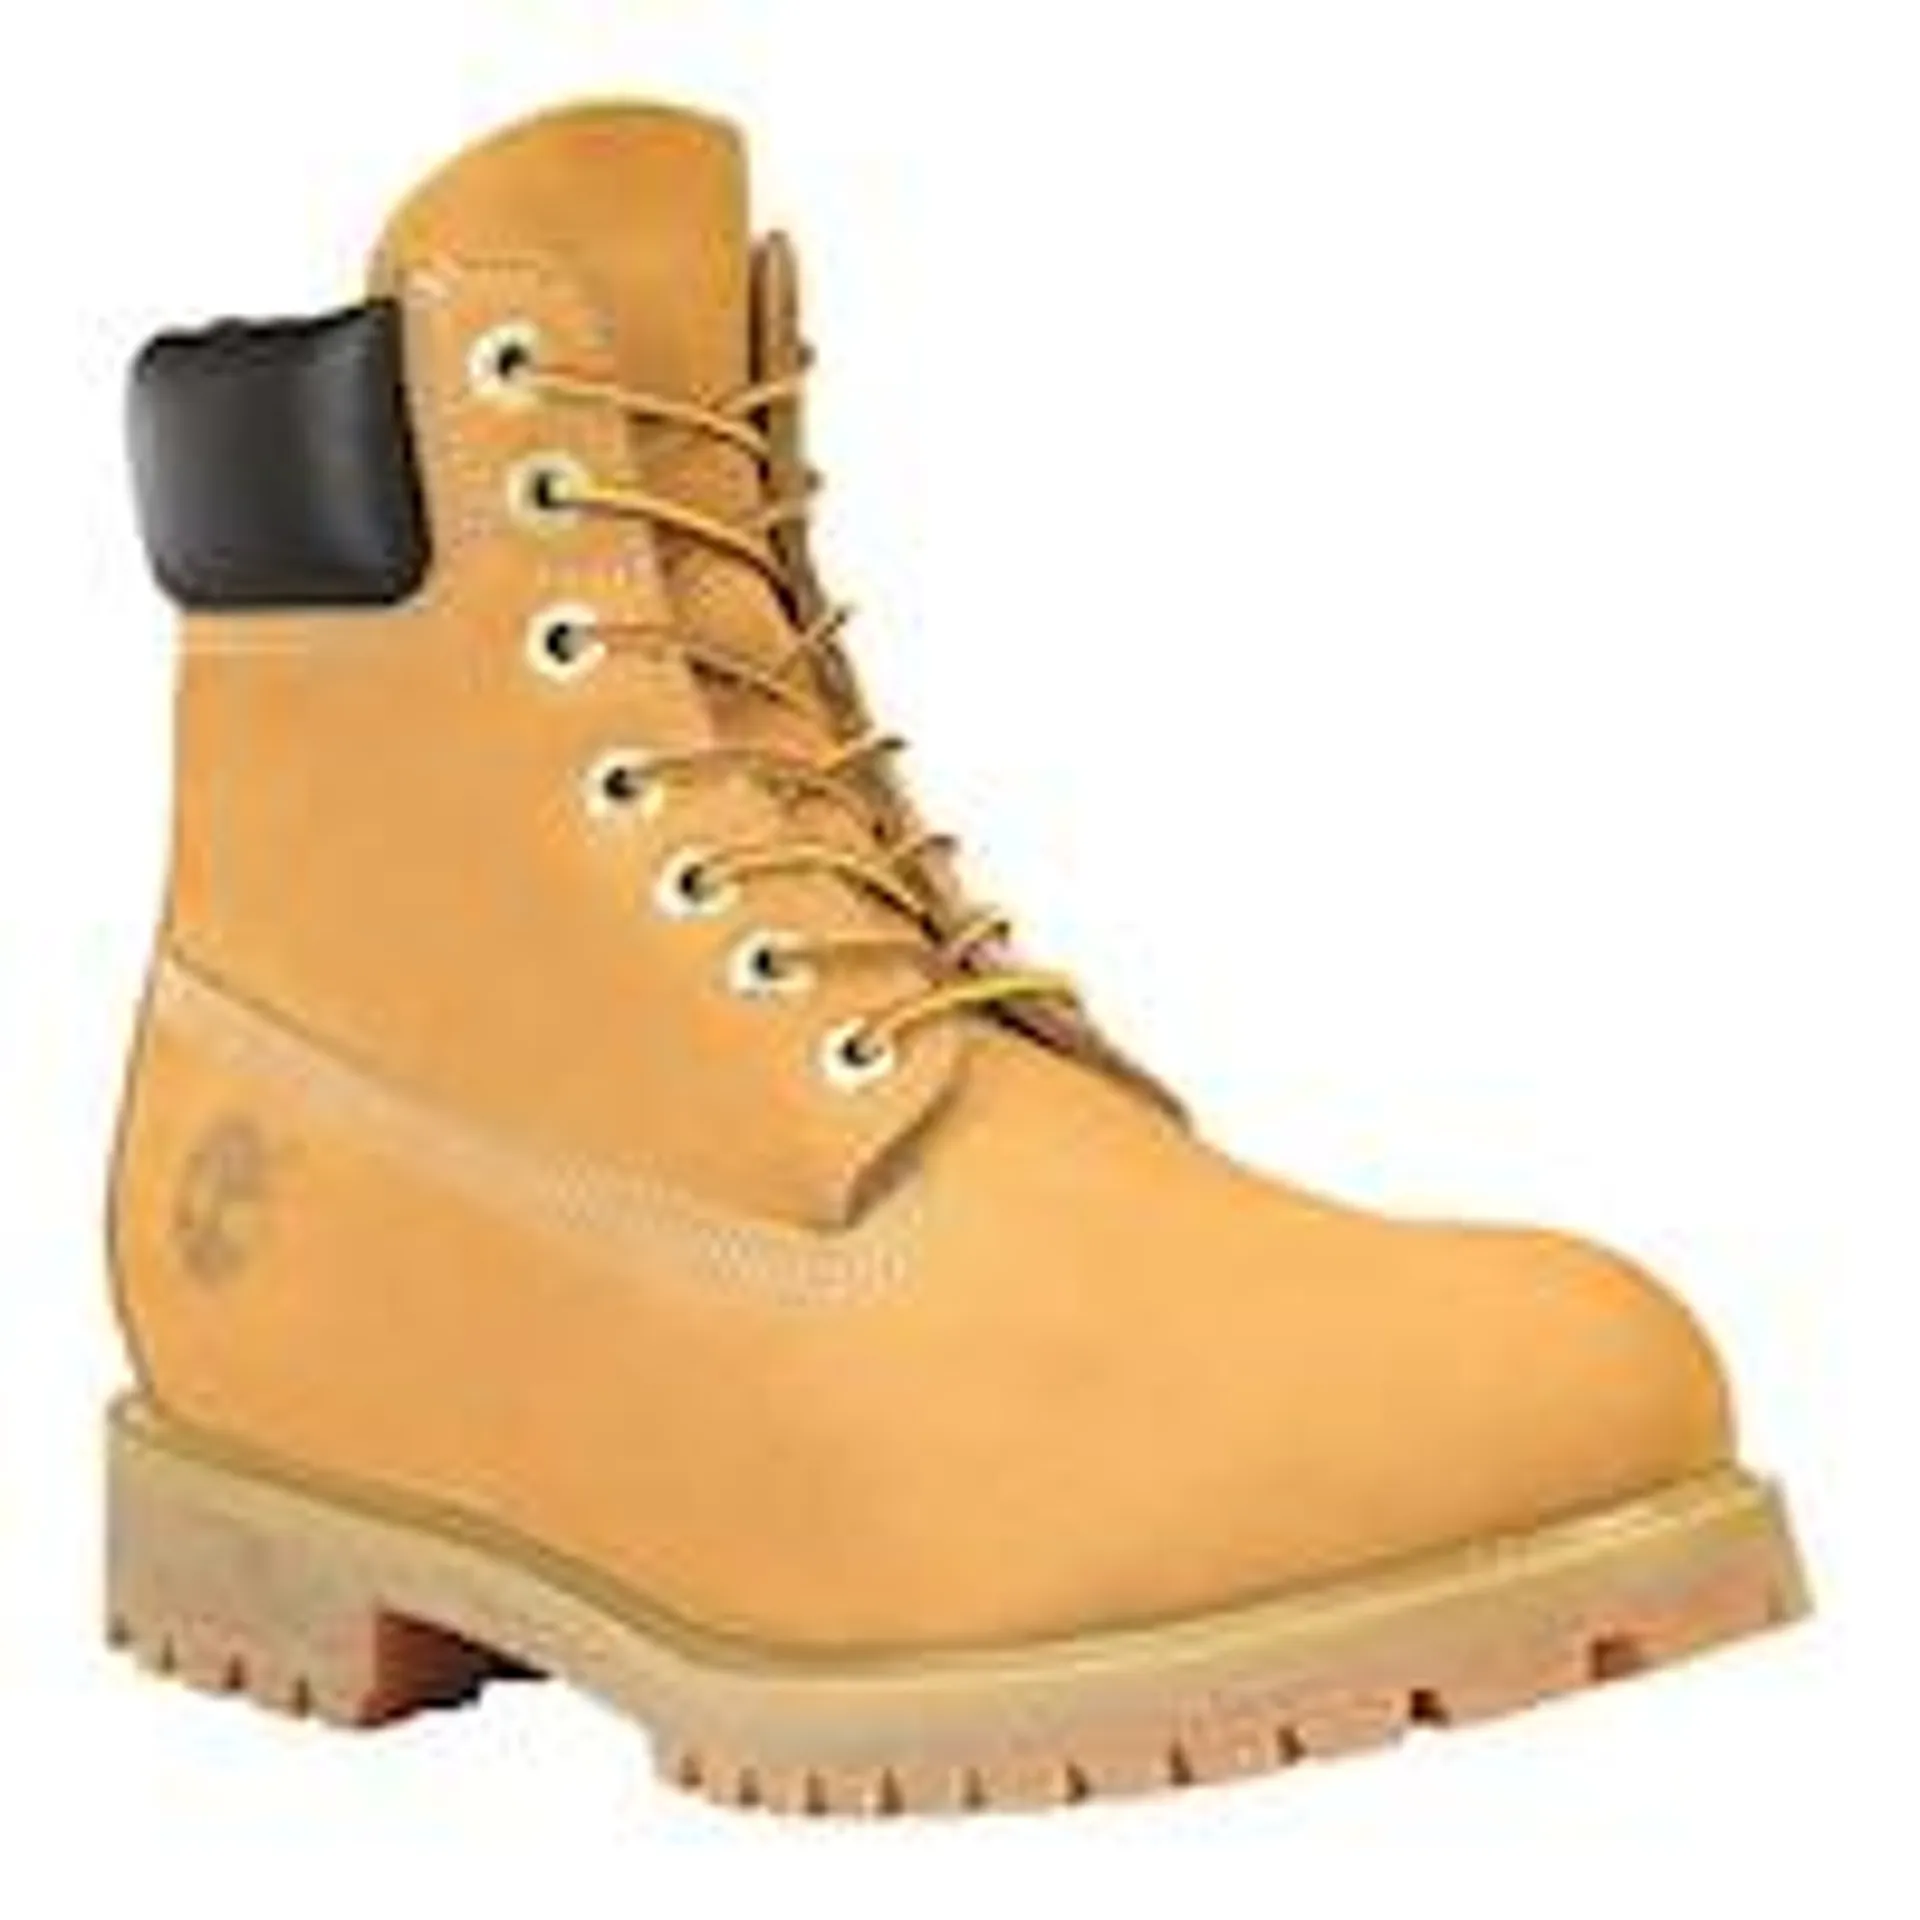 Timberland Men's Icon 6 Inch Boots, Ankle, Casual, Winter, Rain, Waterproof, Insulated